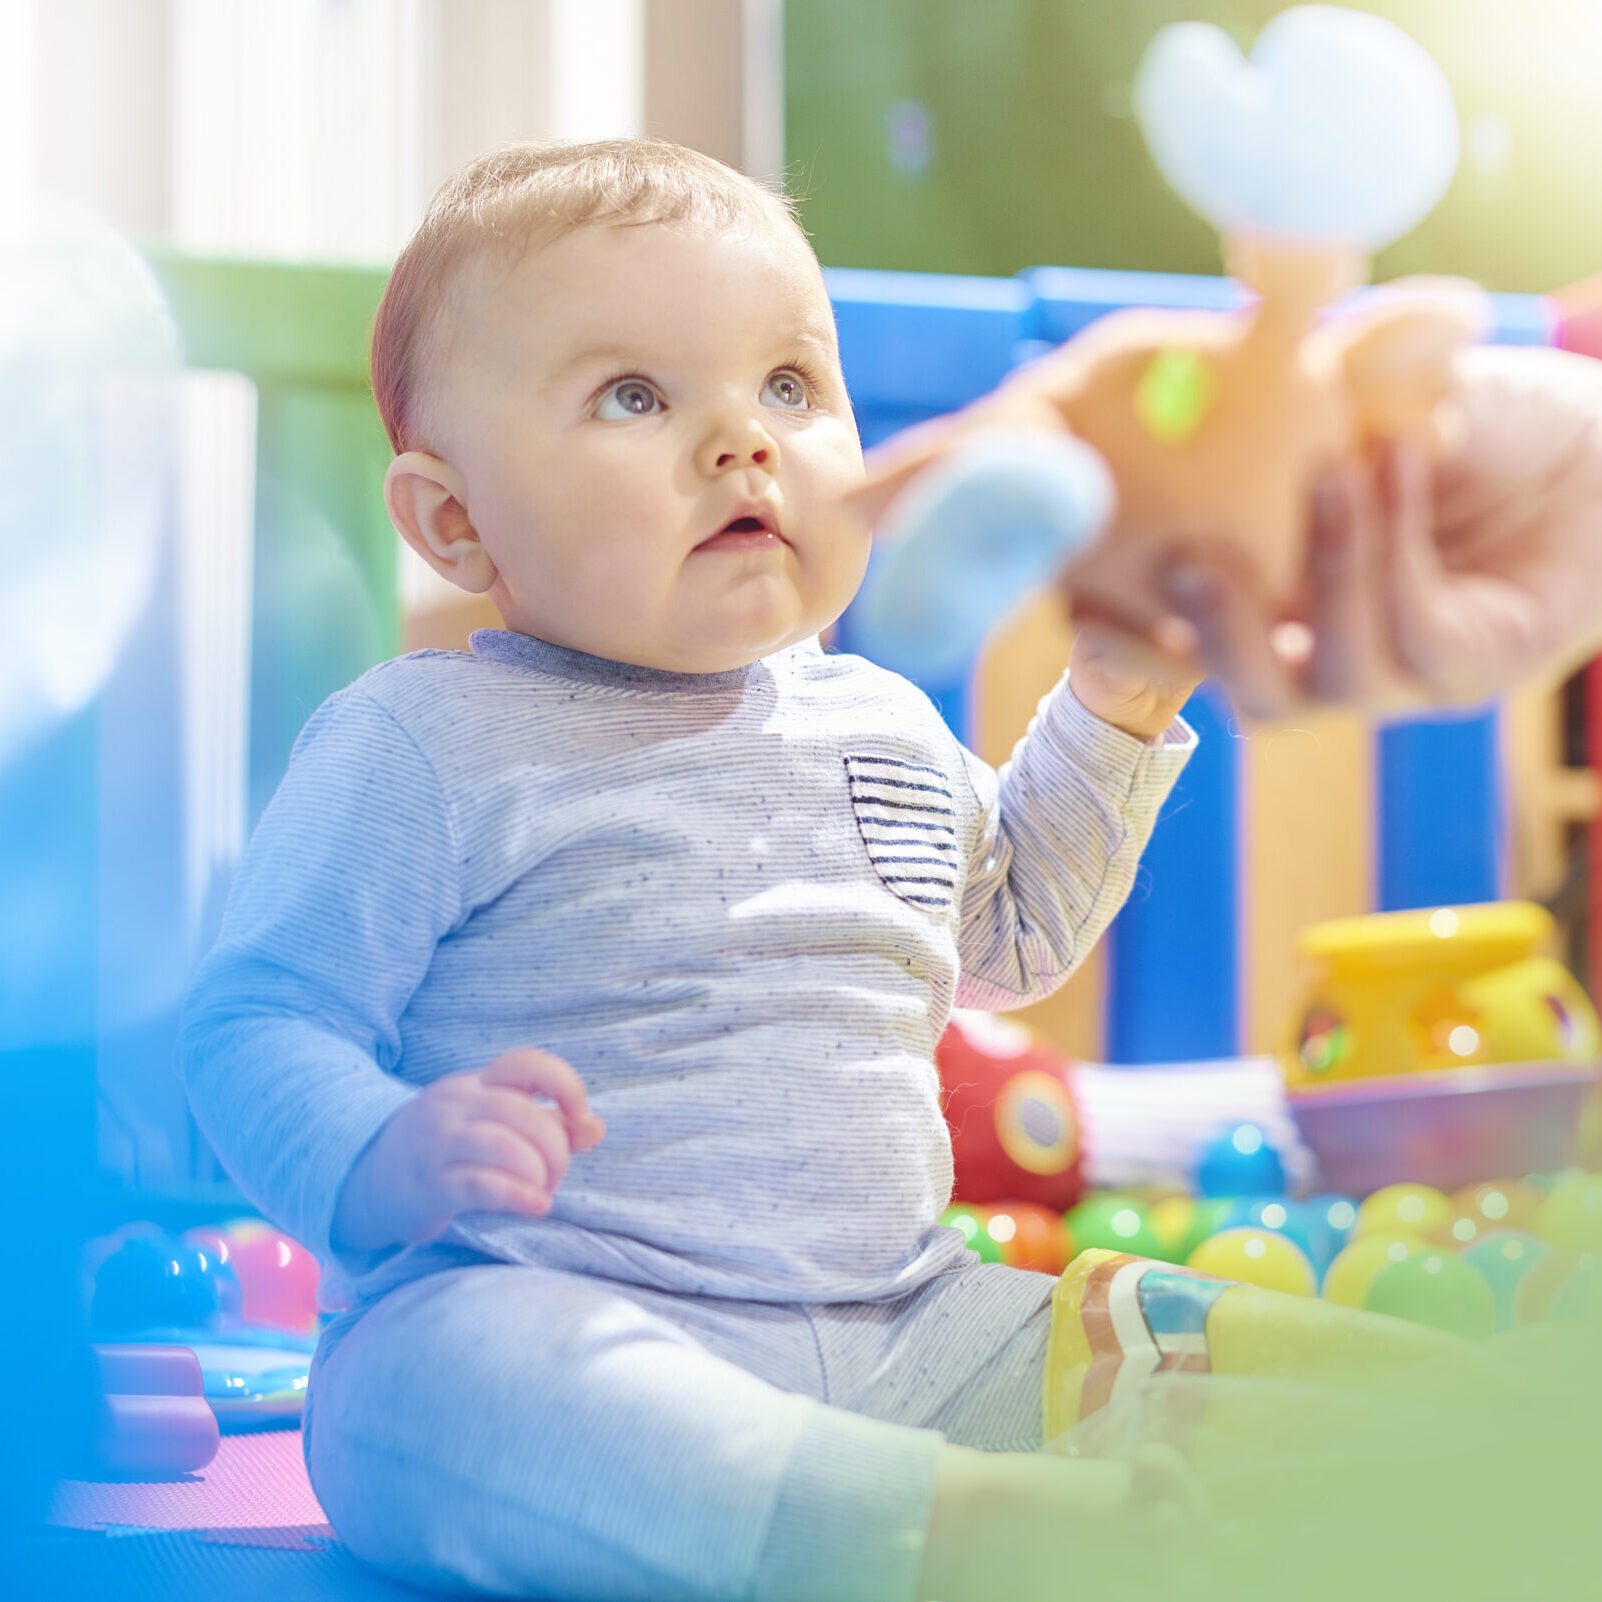 A young baby boy sits playing in his brightly coloured playpen. He discovering how to move and play with his toys. The bright colours, sounds and different textures of the toys are building his sensory perceptions. His mother is passing him one of his cuddly toys.